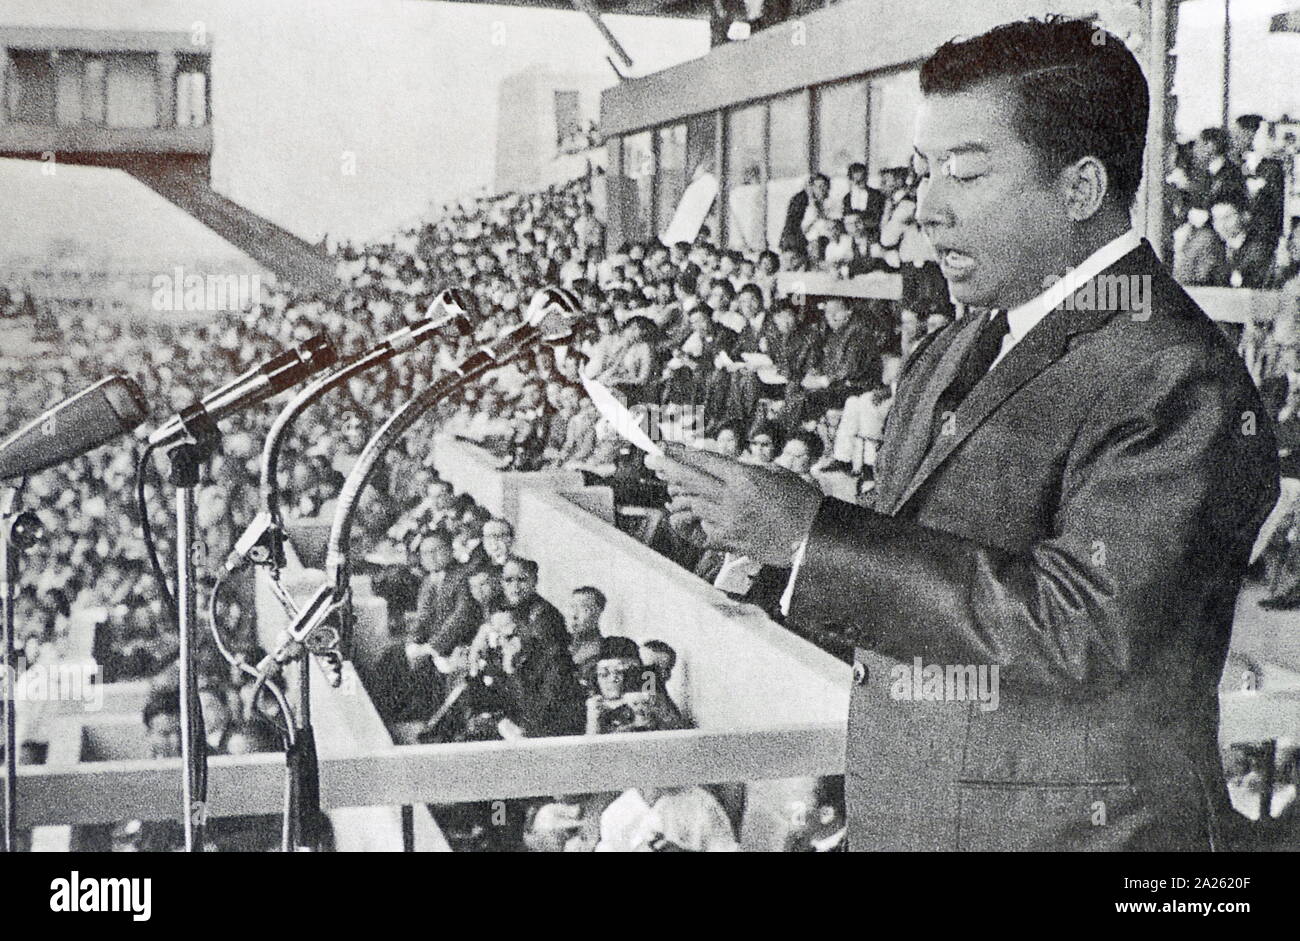 Cambodian ruler Prince Sihanouk opens the 1966 Pnom Penh, Games of the New Emerging Forces (GANEFO). The games were set up as a counter to the Olympic Games. Established for the athletes of the so-called 'emerging nations', GANEFO was the name given both to the games held in Jakarta in 1963. Stock Photo